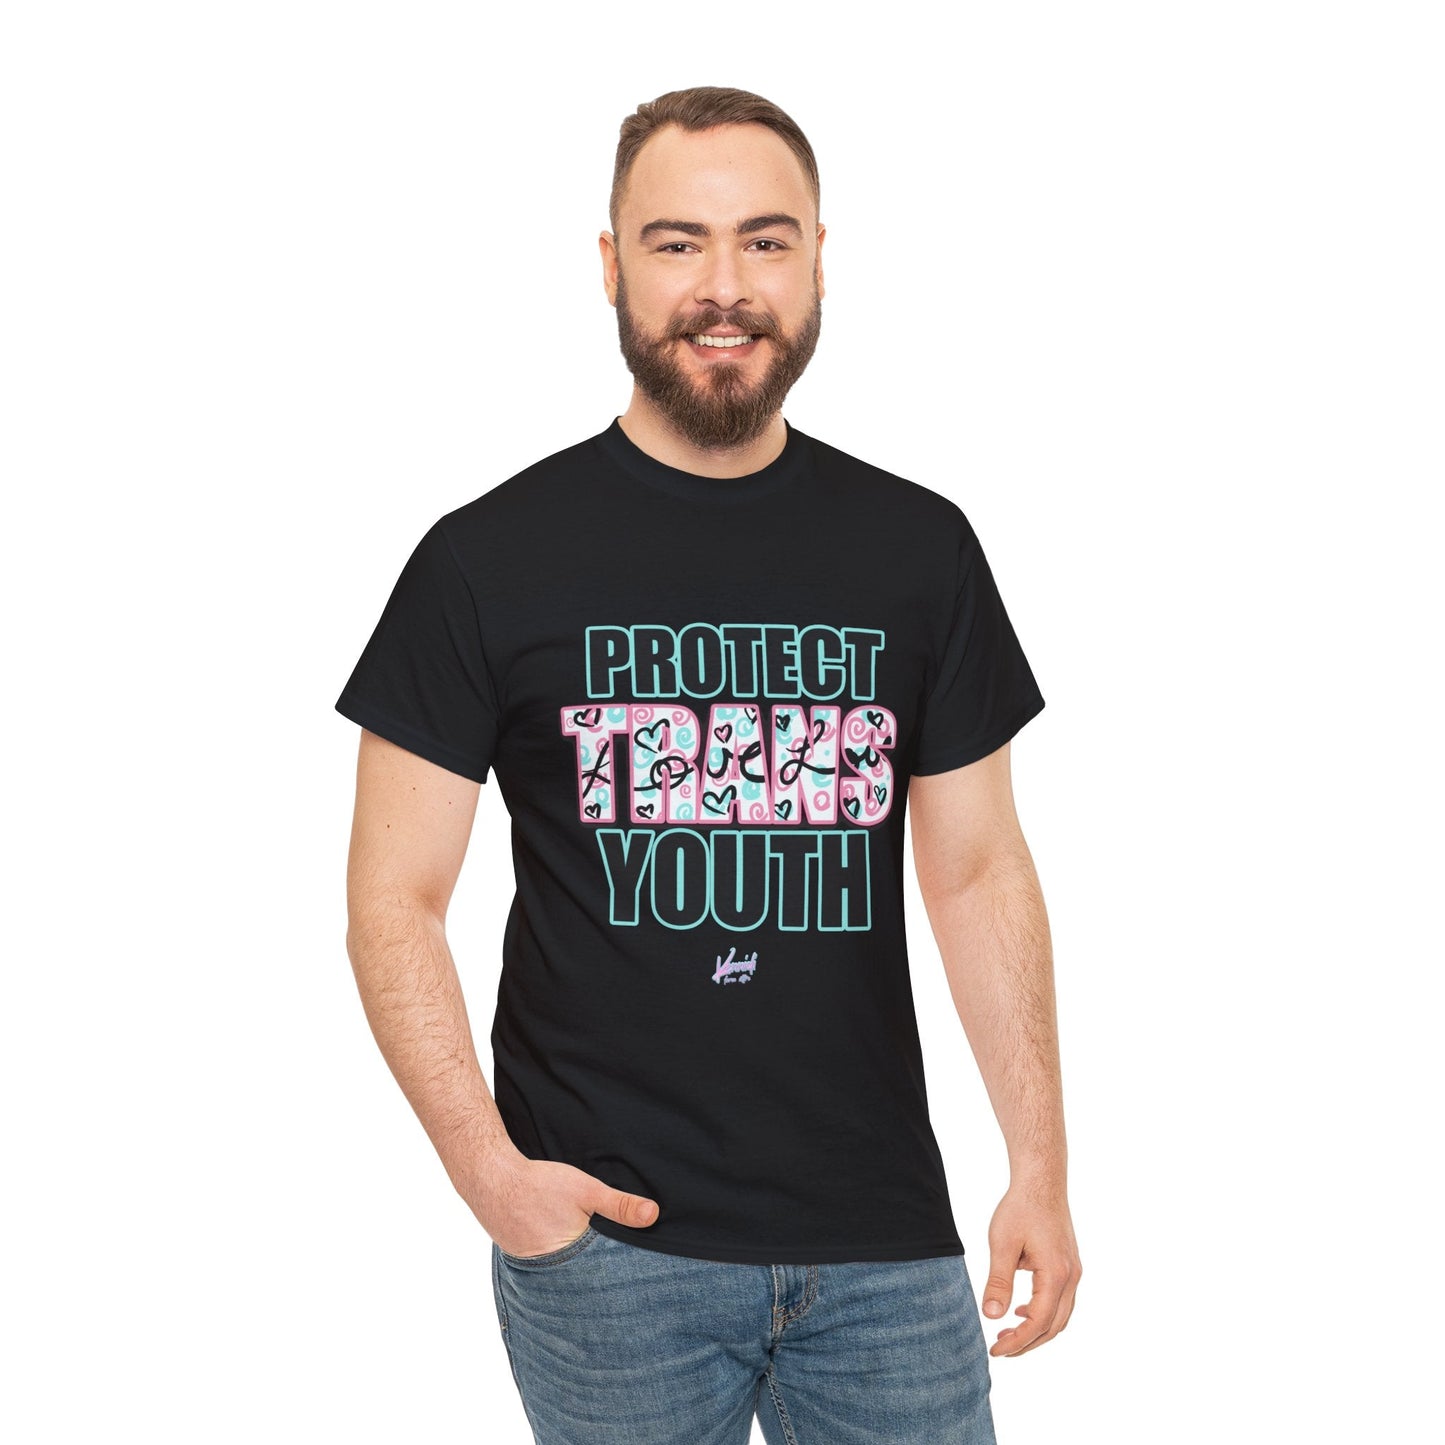 Protect Trans Youth Love 3.0 Unisex Heavy Cotton Tee - Black / S T - Shirt